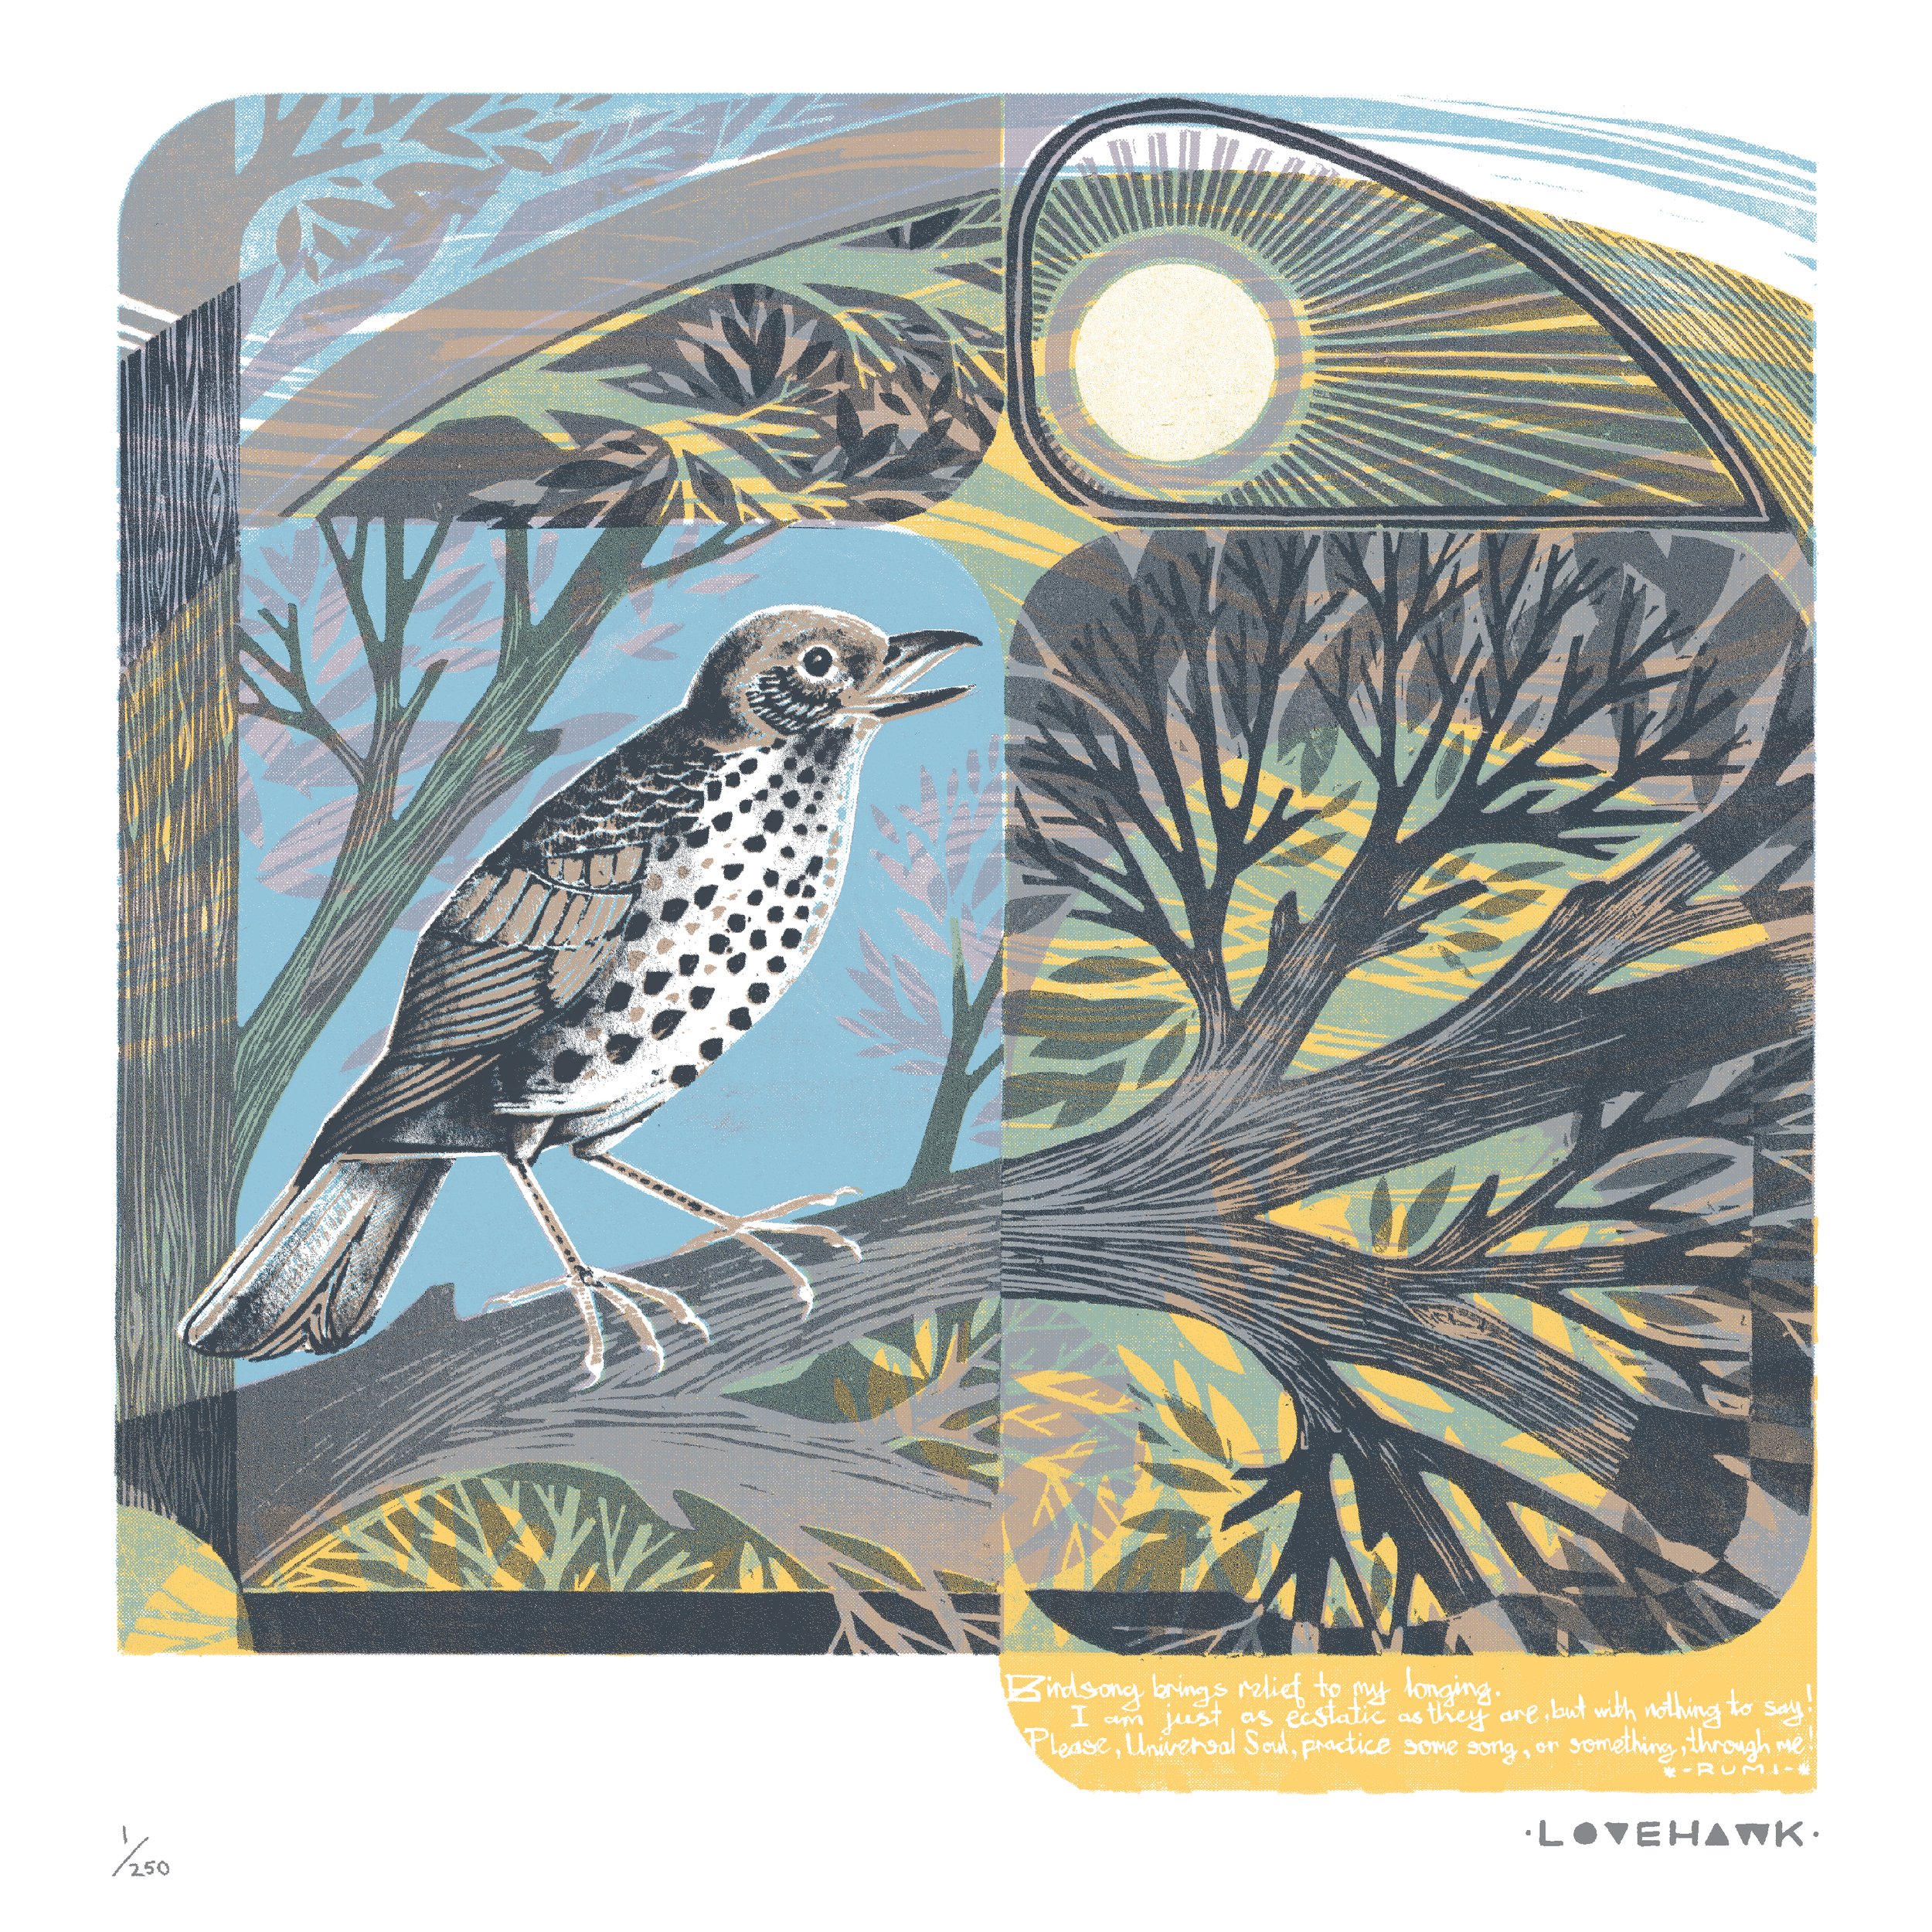 For The Birds: The Birdsong Project Features 242 Original Recordings By  Leading Artists Inspired By Birdsong